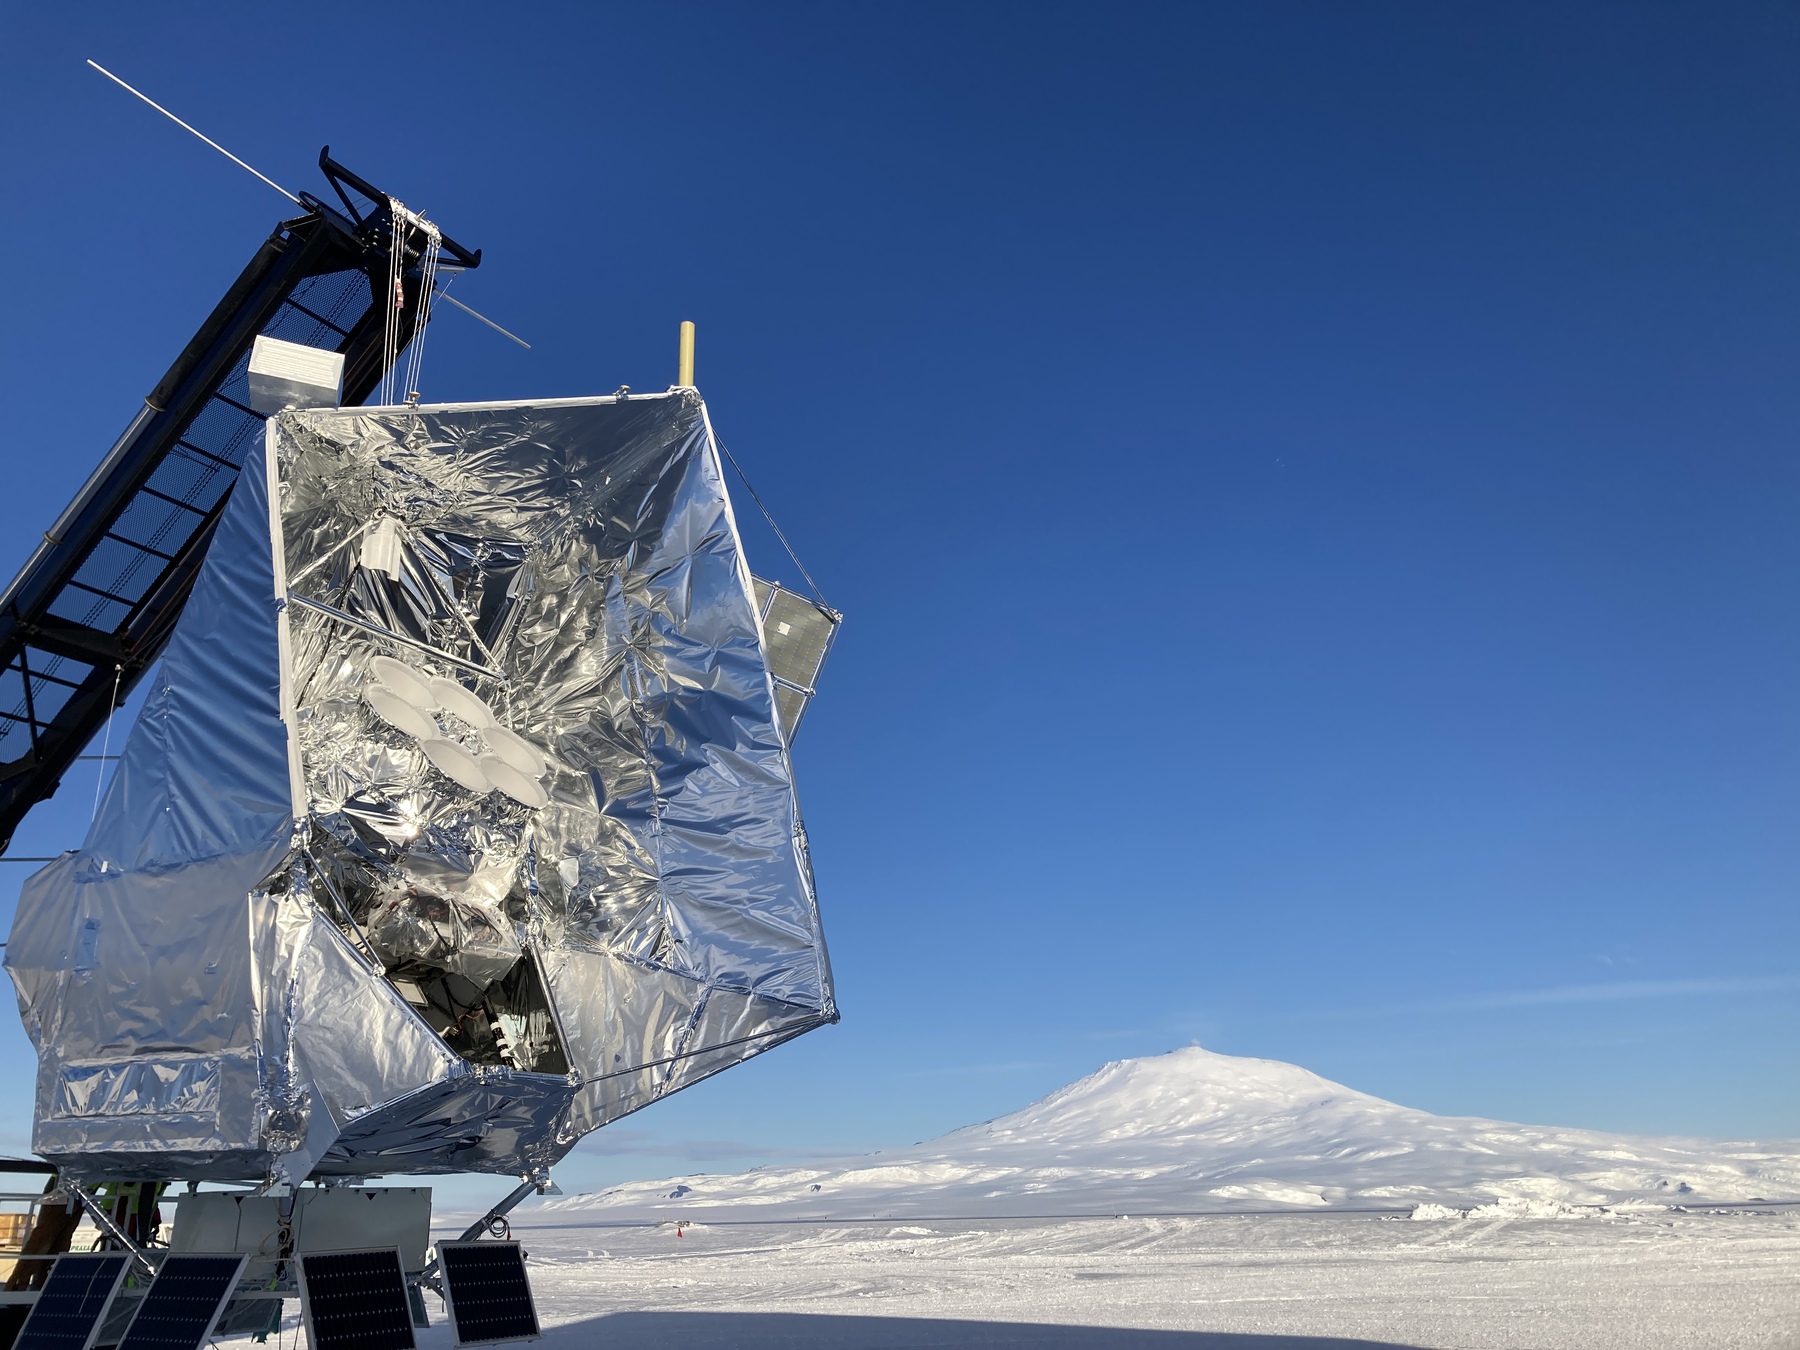 A microwave background telescope sits against a blue sky.